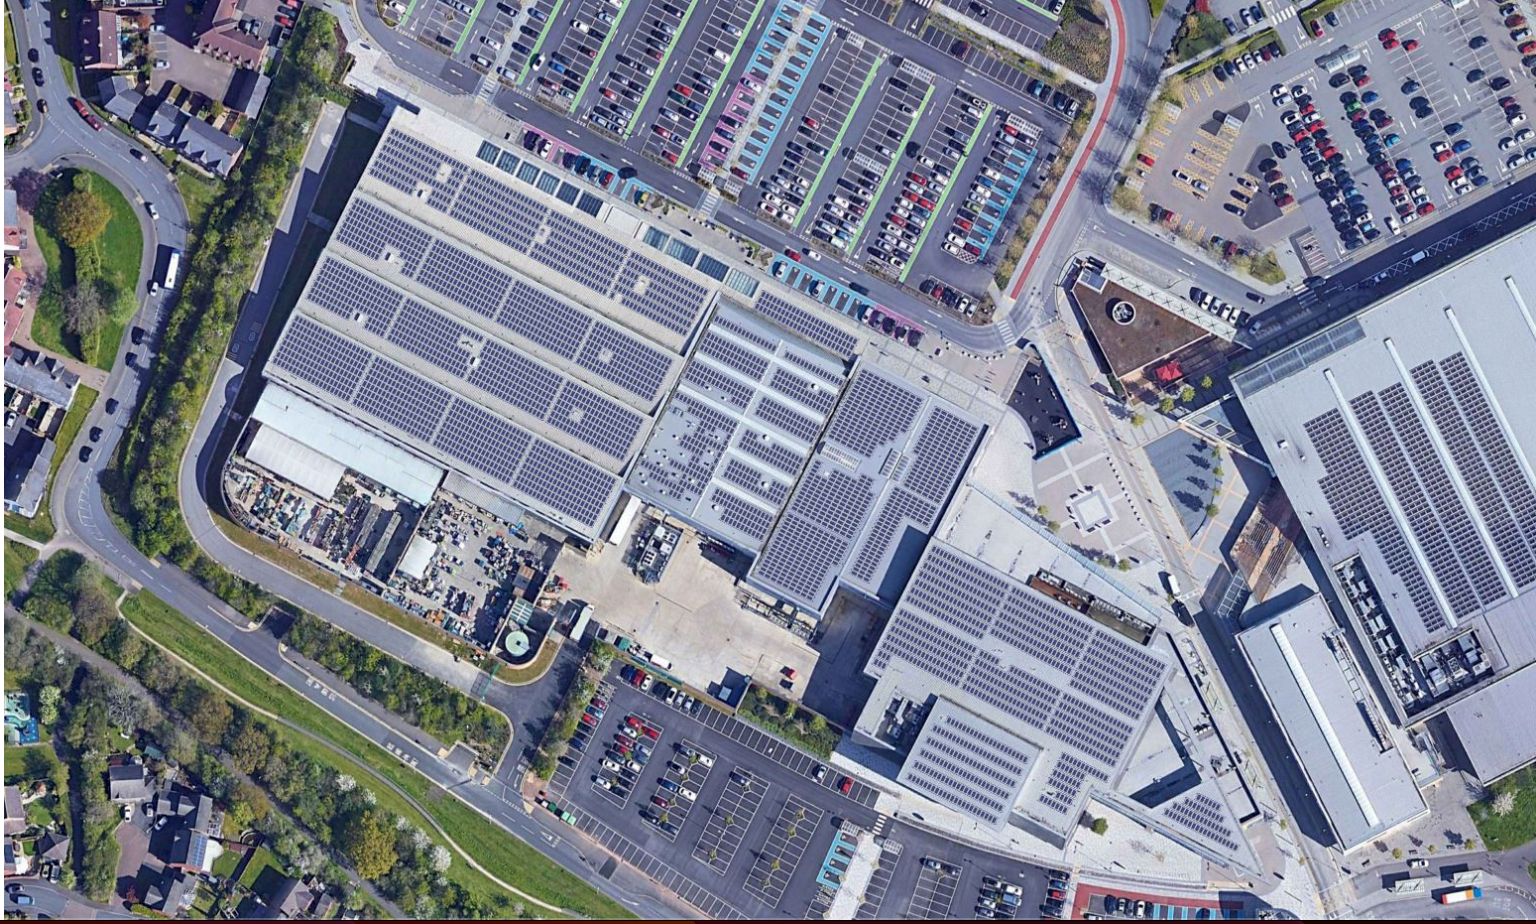 An aerial view of the Orbital centre in Swindon